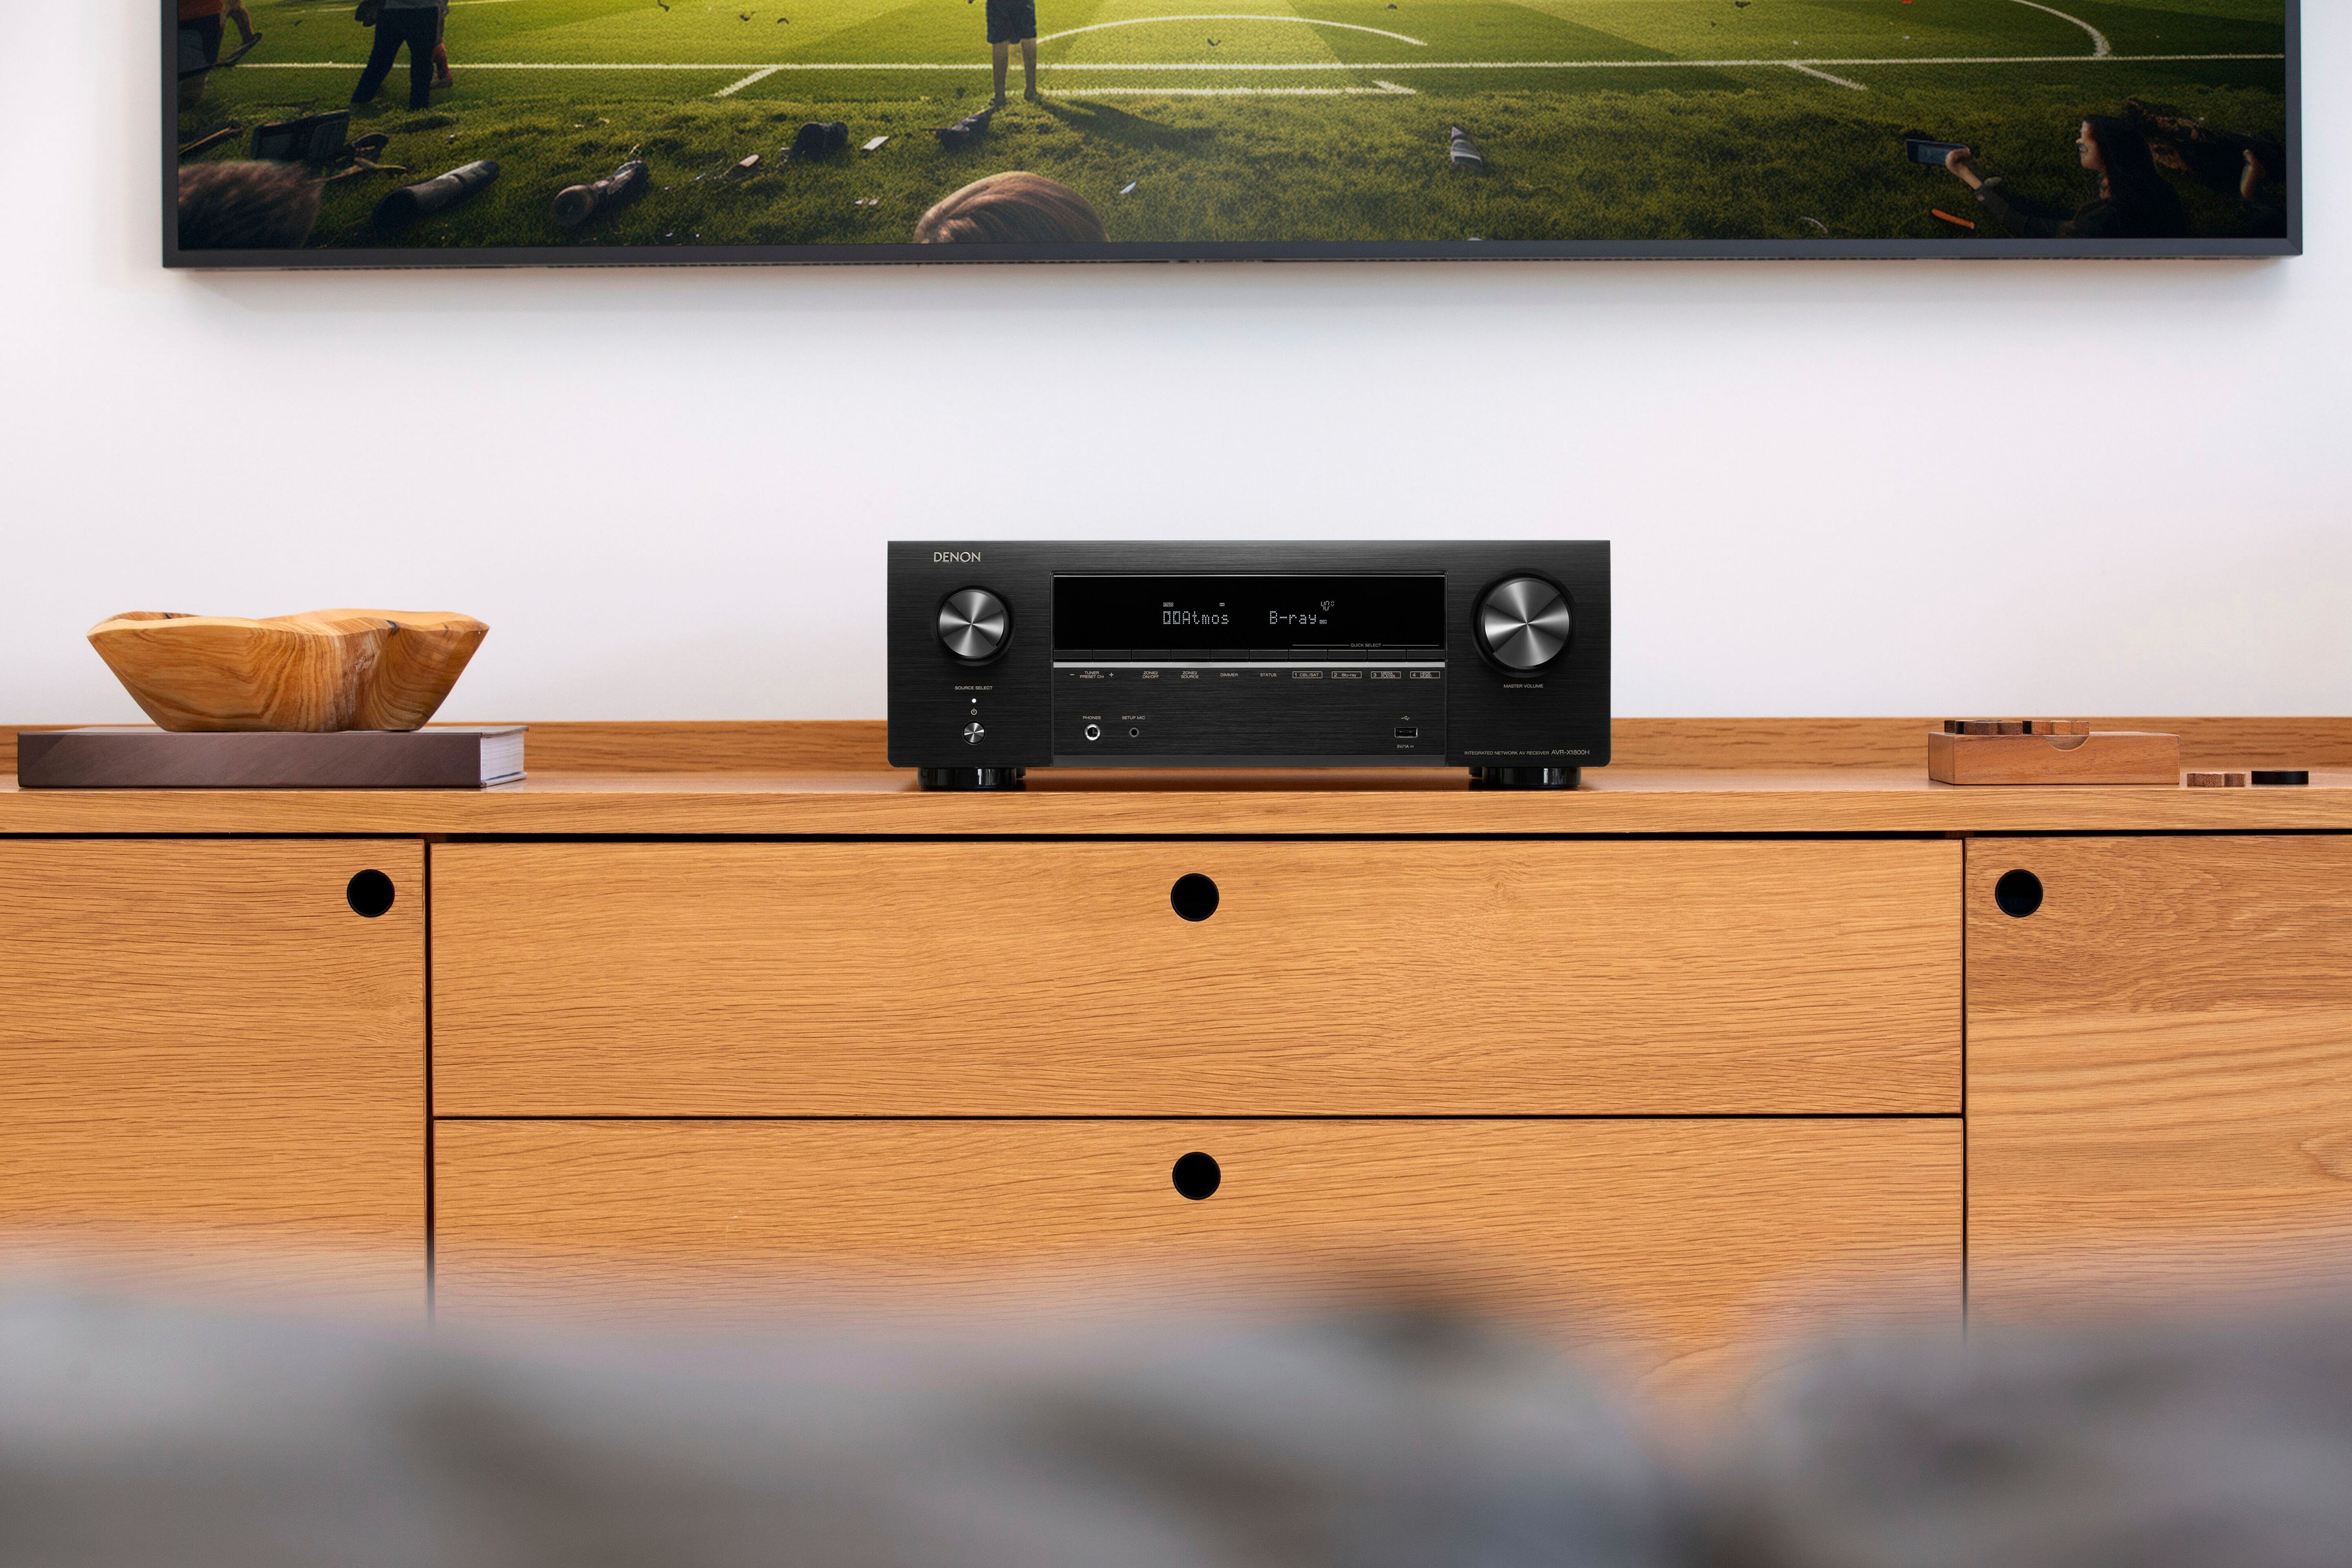 HD A/V Capable Buy Theater - with 80W Bluetooth HDR AVRX1800H HEOS AVR-X1800H Home Best Compatible 8K Denon Ultra Receiver Black Built-In 7.2-Ch.